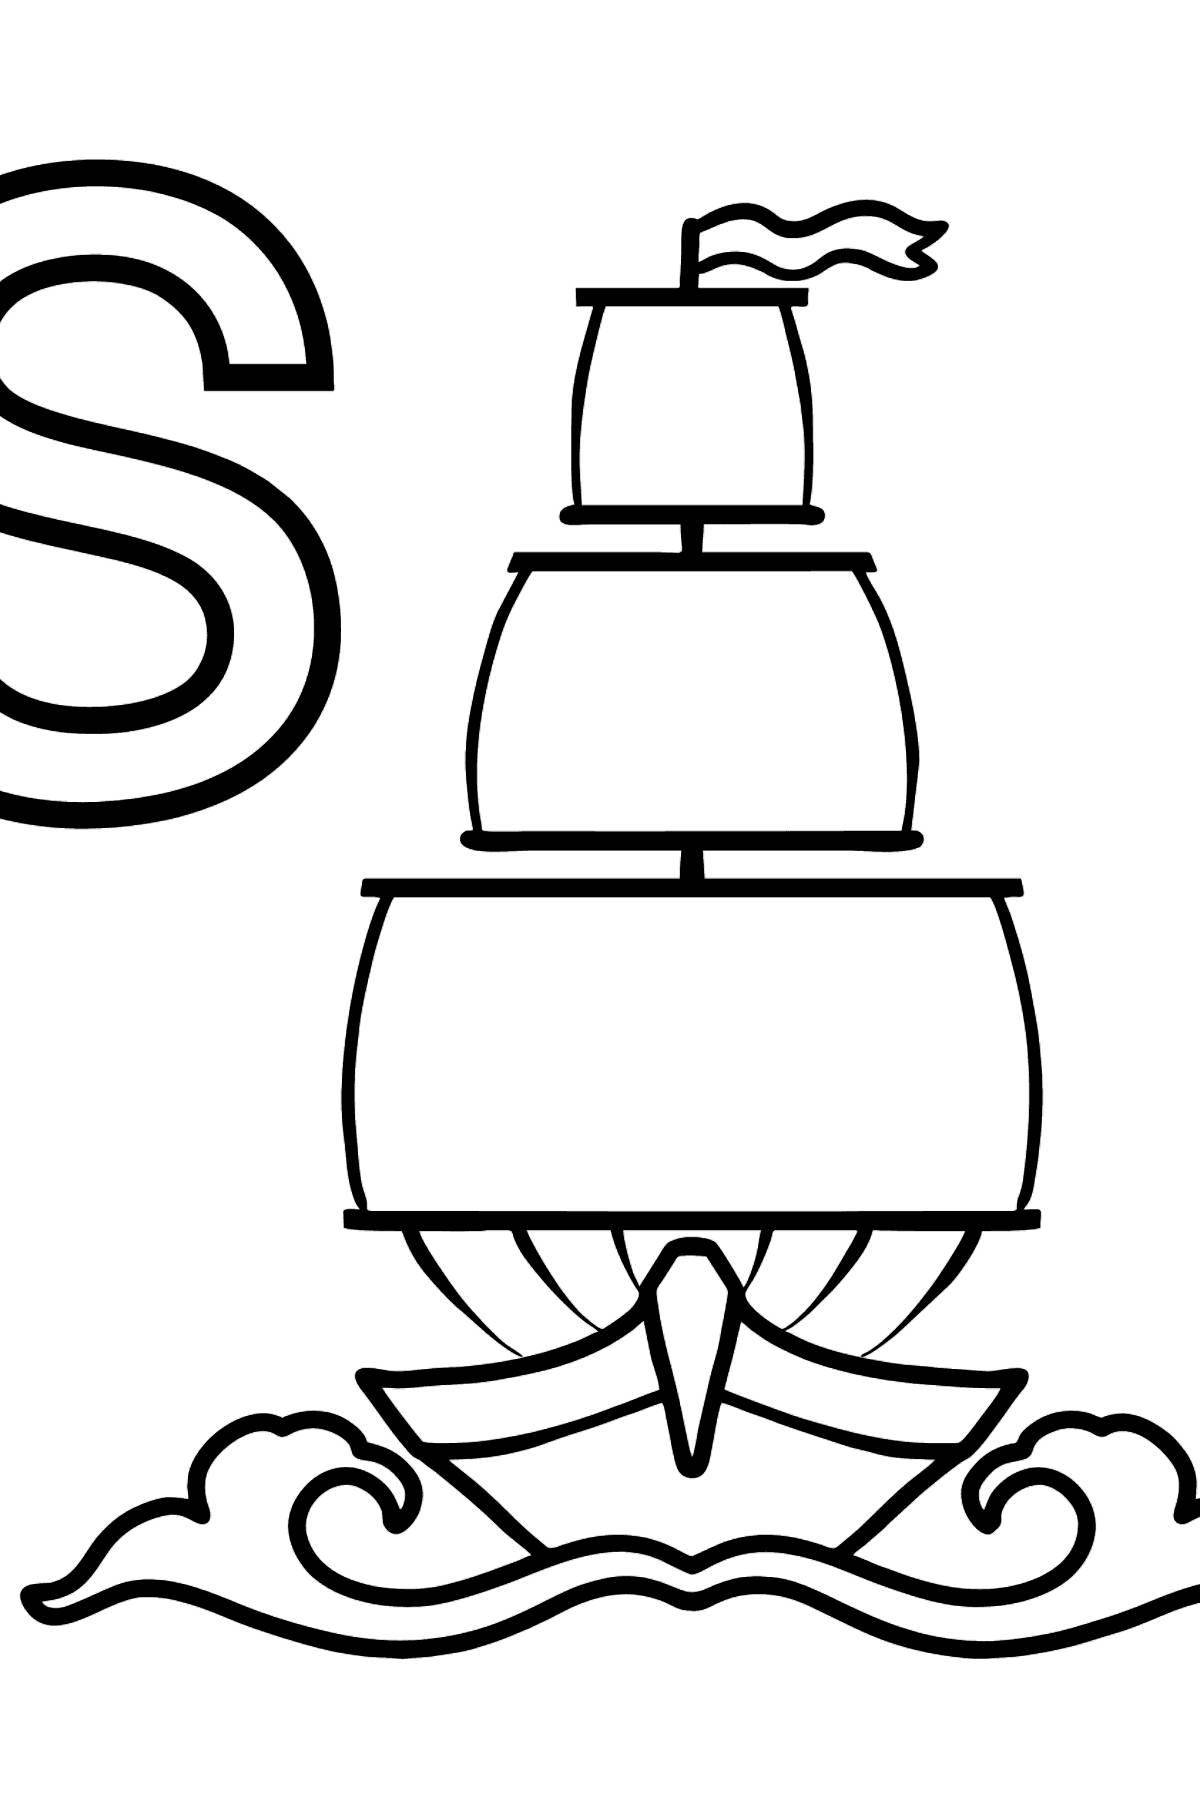 Glittering letter s coloring page